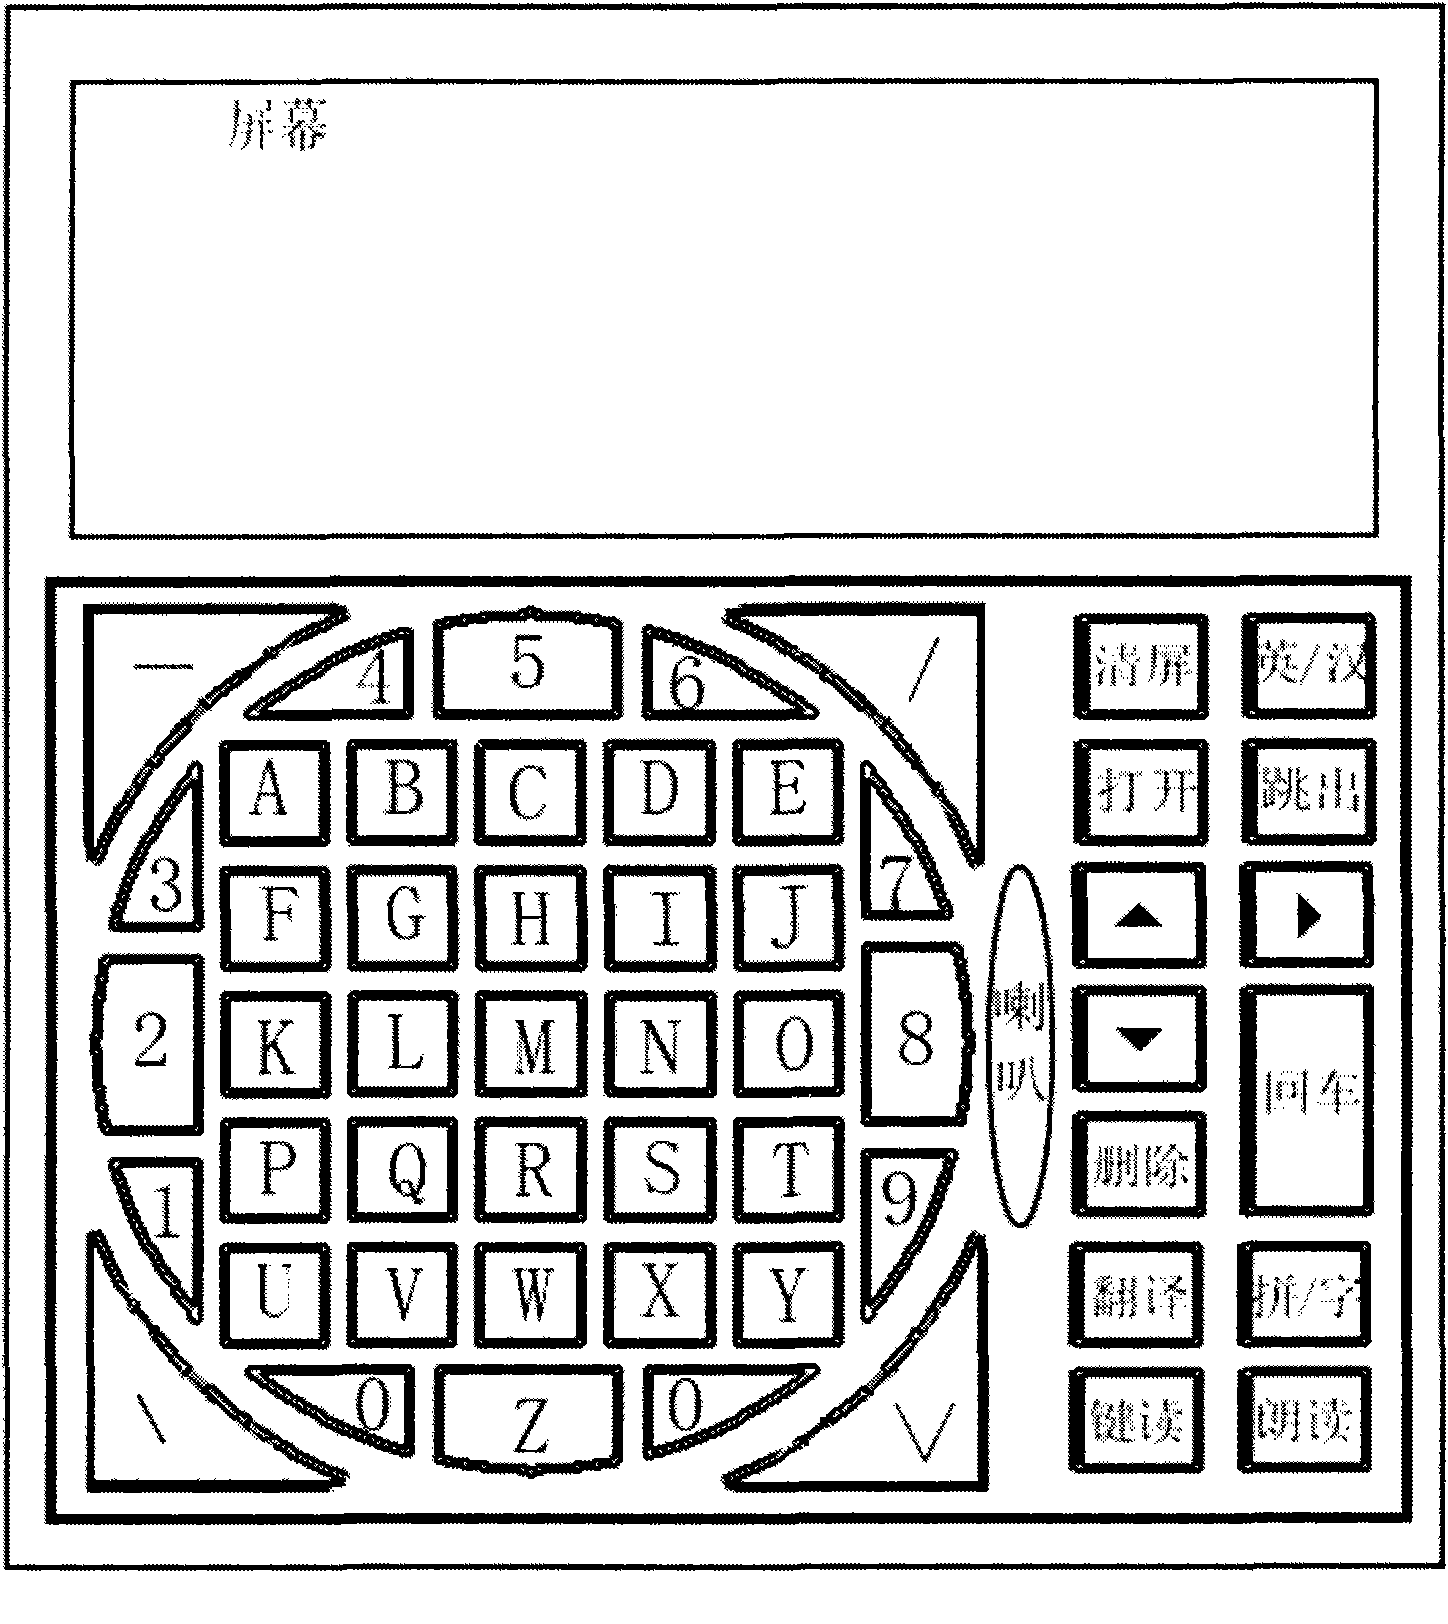 Keyboard and input method for Chinese pinyin